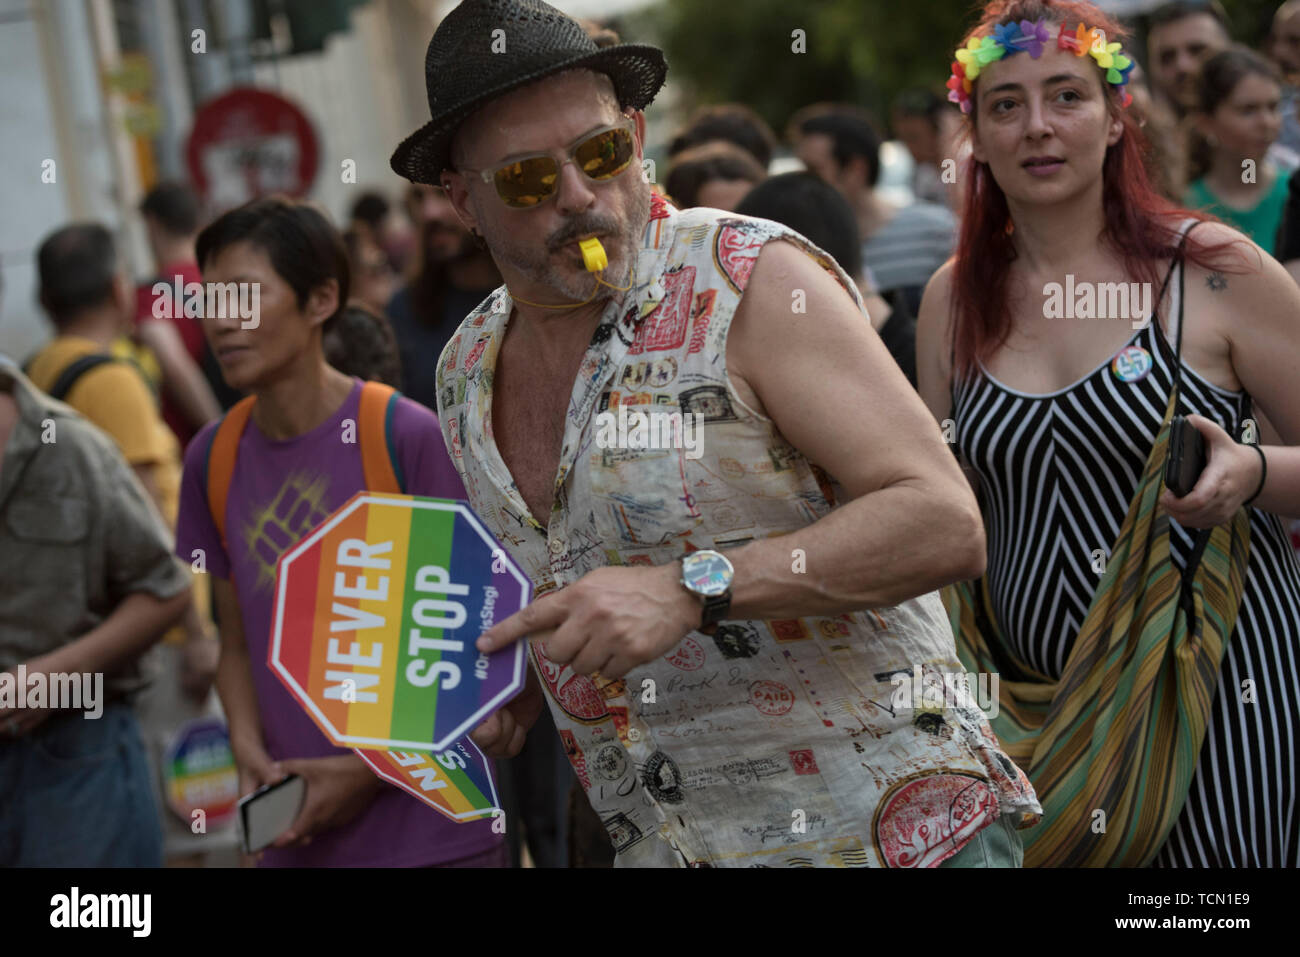 Athens, Greece. 8th June 2019. People march dancing, waving rainbow flags and holding placards during the Athens Pride 2019 parade. Thousands joined the Athens Pride annual event which was this year dedicated to Zak Kostopoulos, the LGBTQ activist who was beaten to death in broad daylight back in September 2018. Credit: Nikolas Georgiou/Alamy Live News Stock Photo